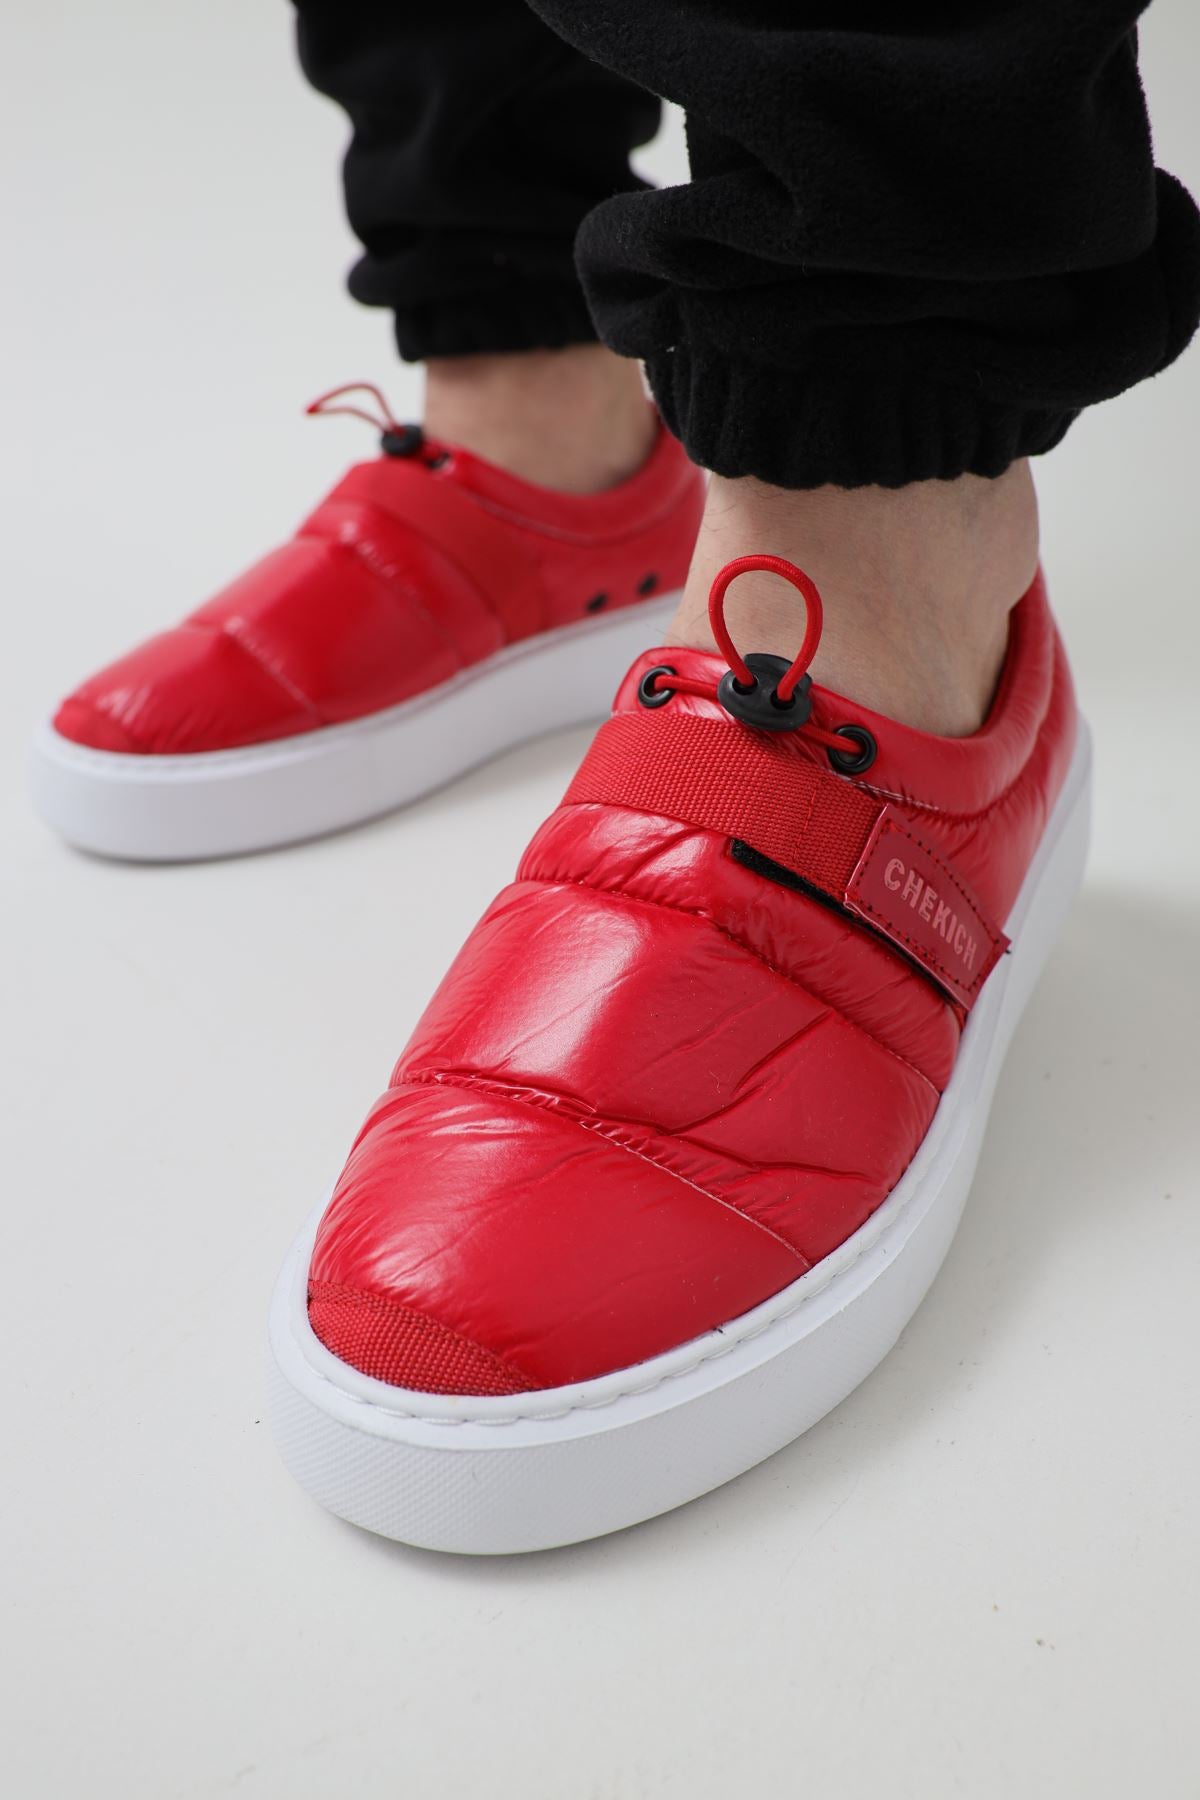 Buy Gola Contact Leather navy/off white/red sneakers online from gola